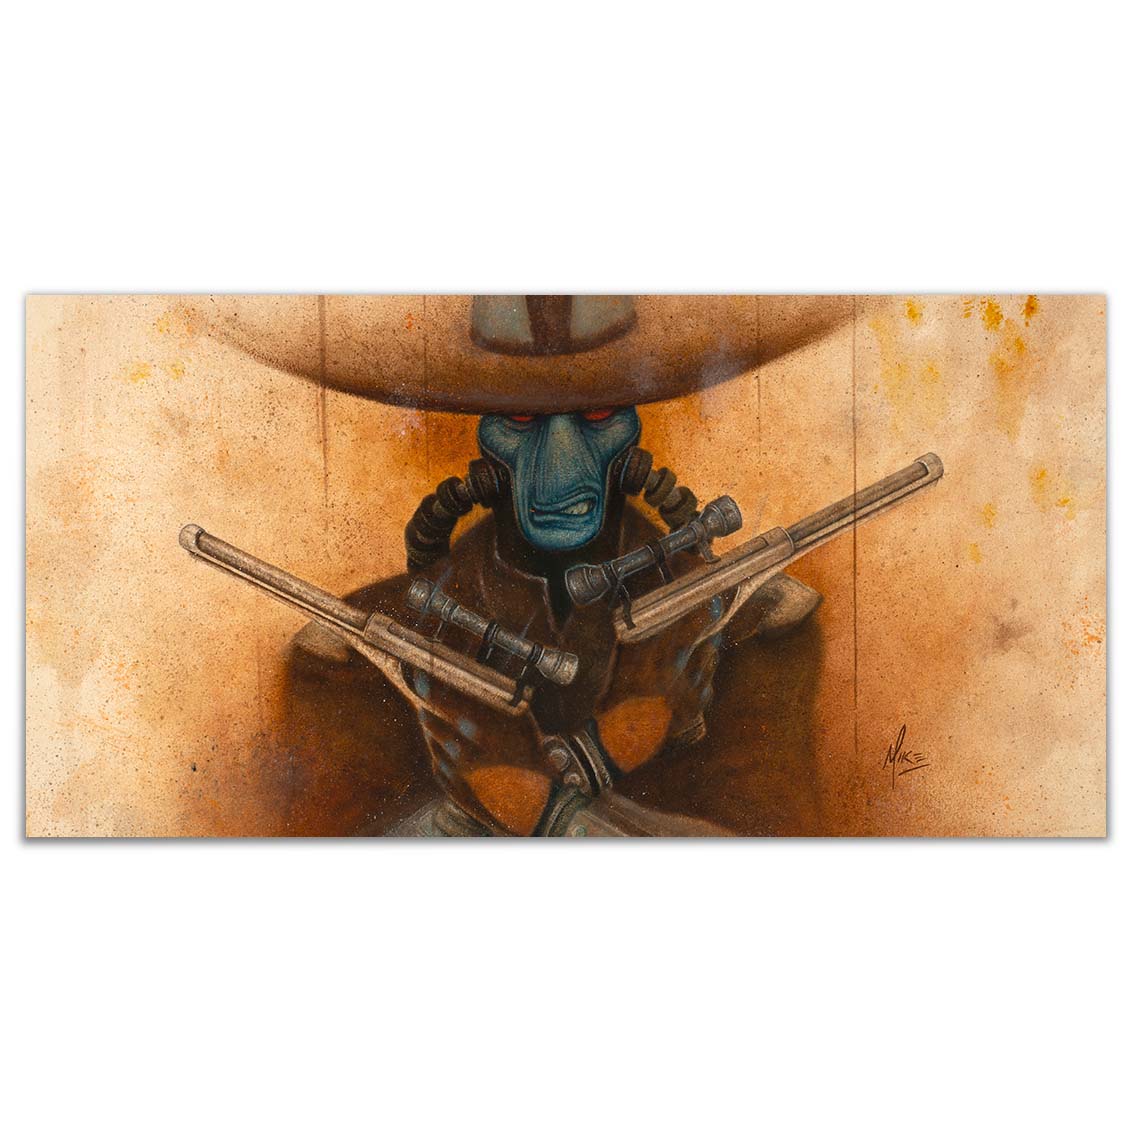 Mike Kupka Star Wars "Blaster for Hire" Limited Edition Canvas Giclee